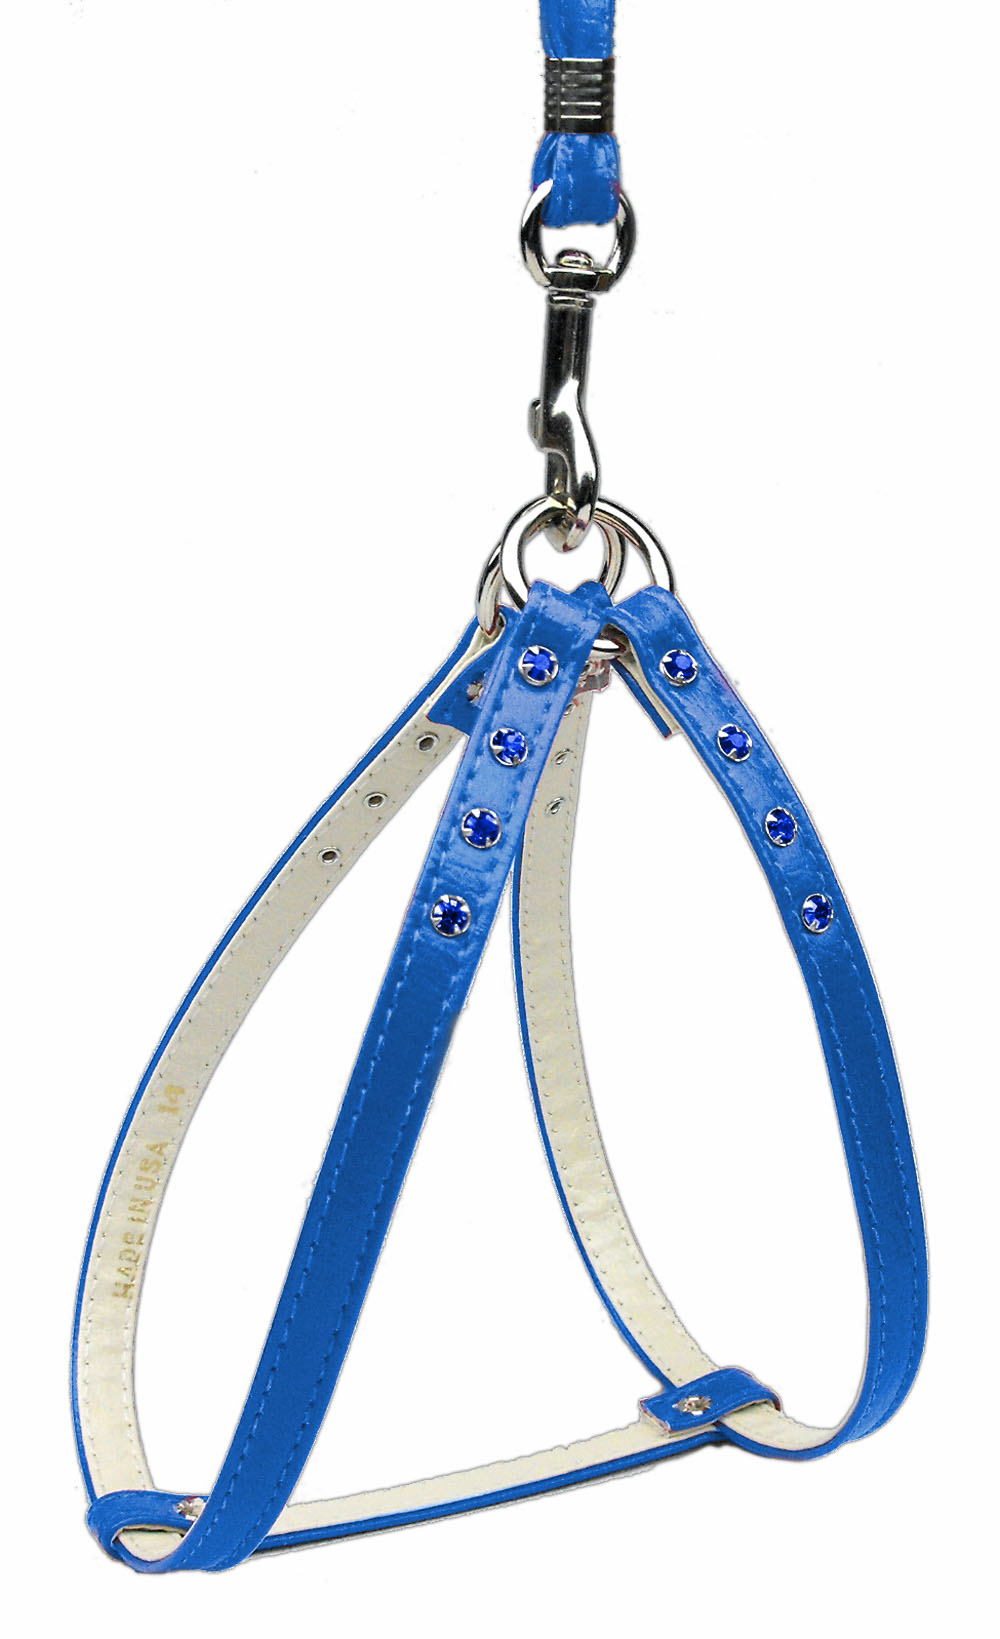 Step-In Harness Blue w/ Blue Stones 20